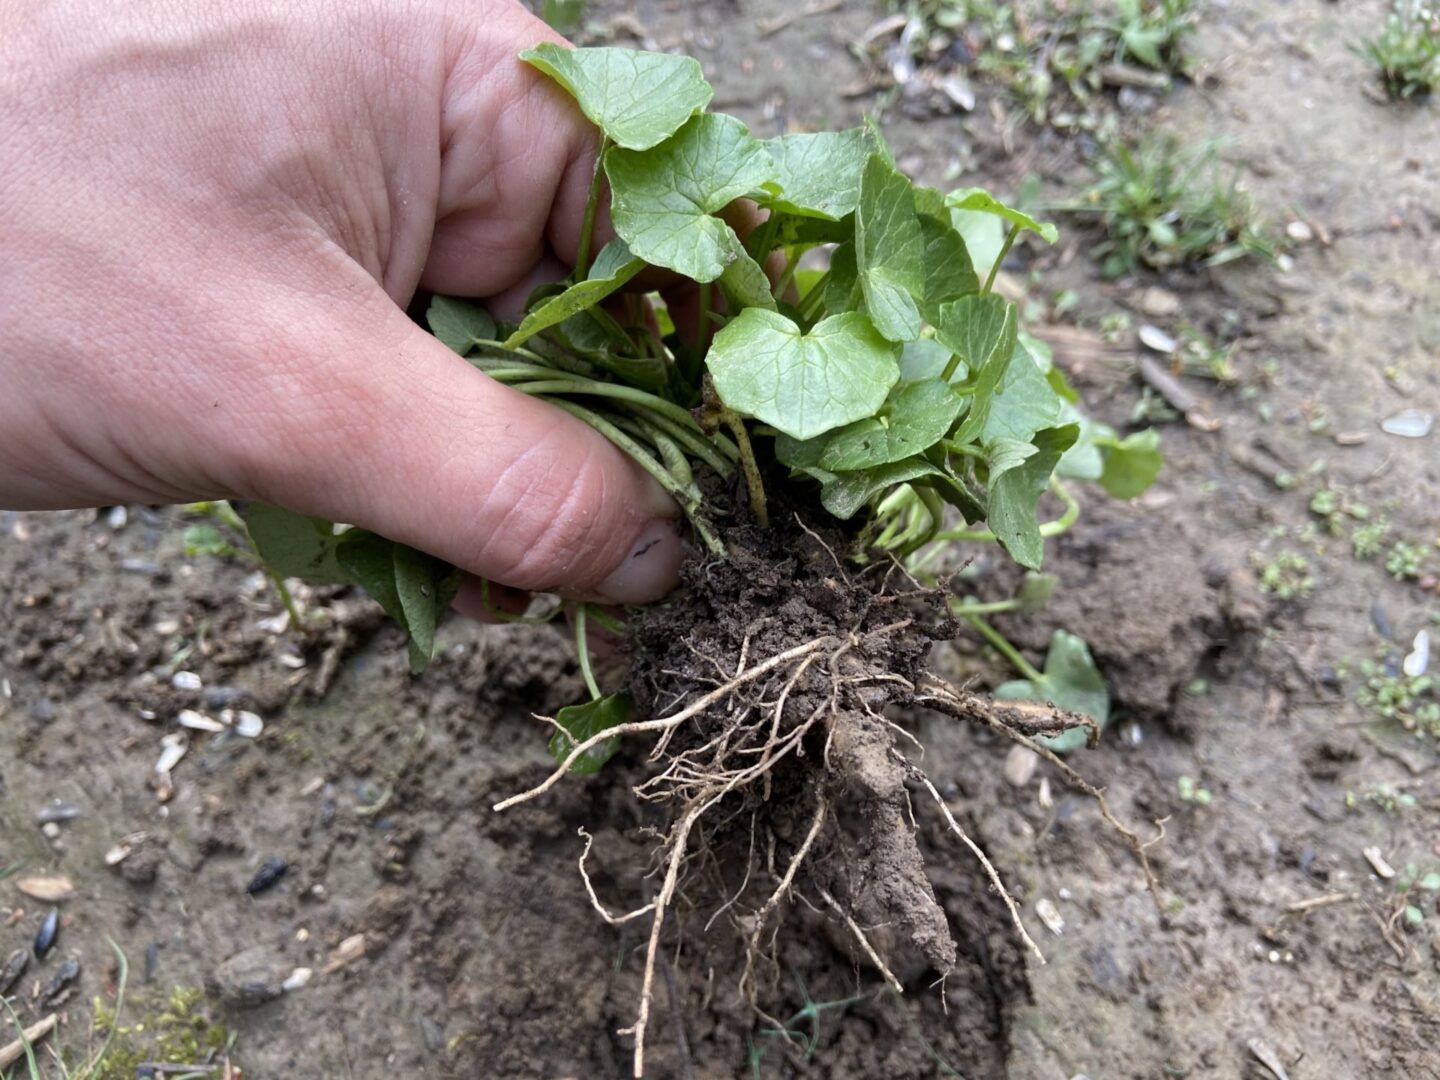 Hand pulling Lesser celandine out of the ground